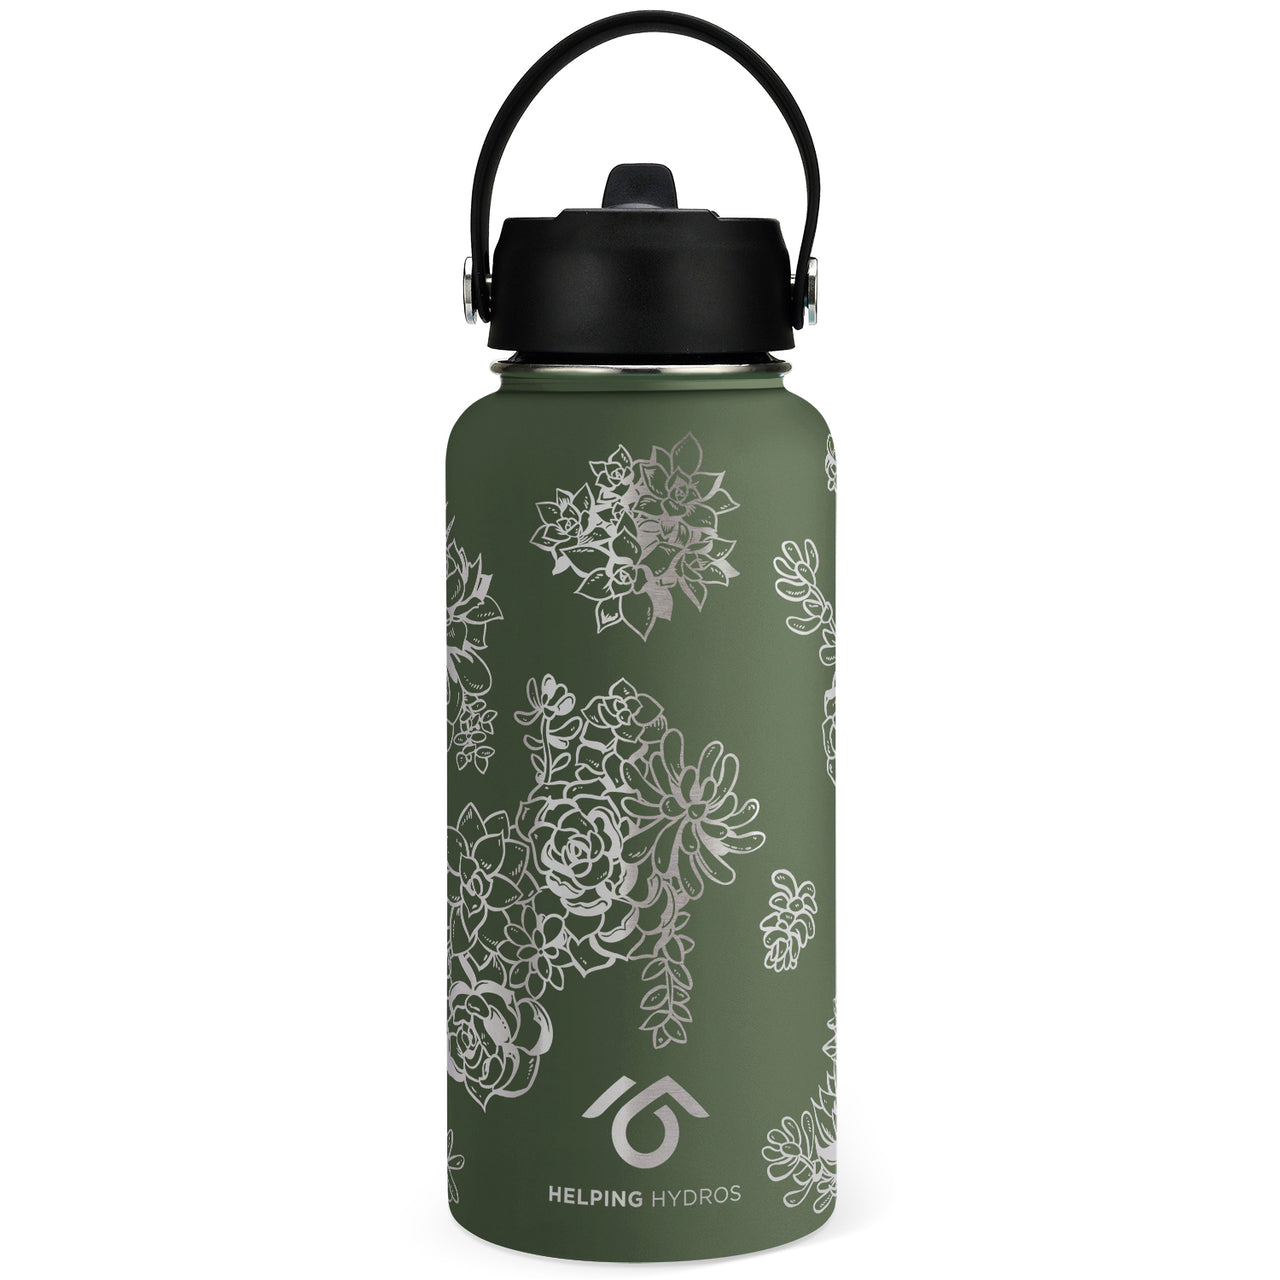 Relief Bottle - Supports the CARE Organization